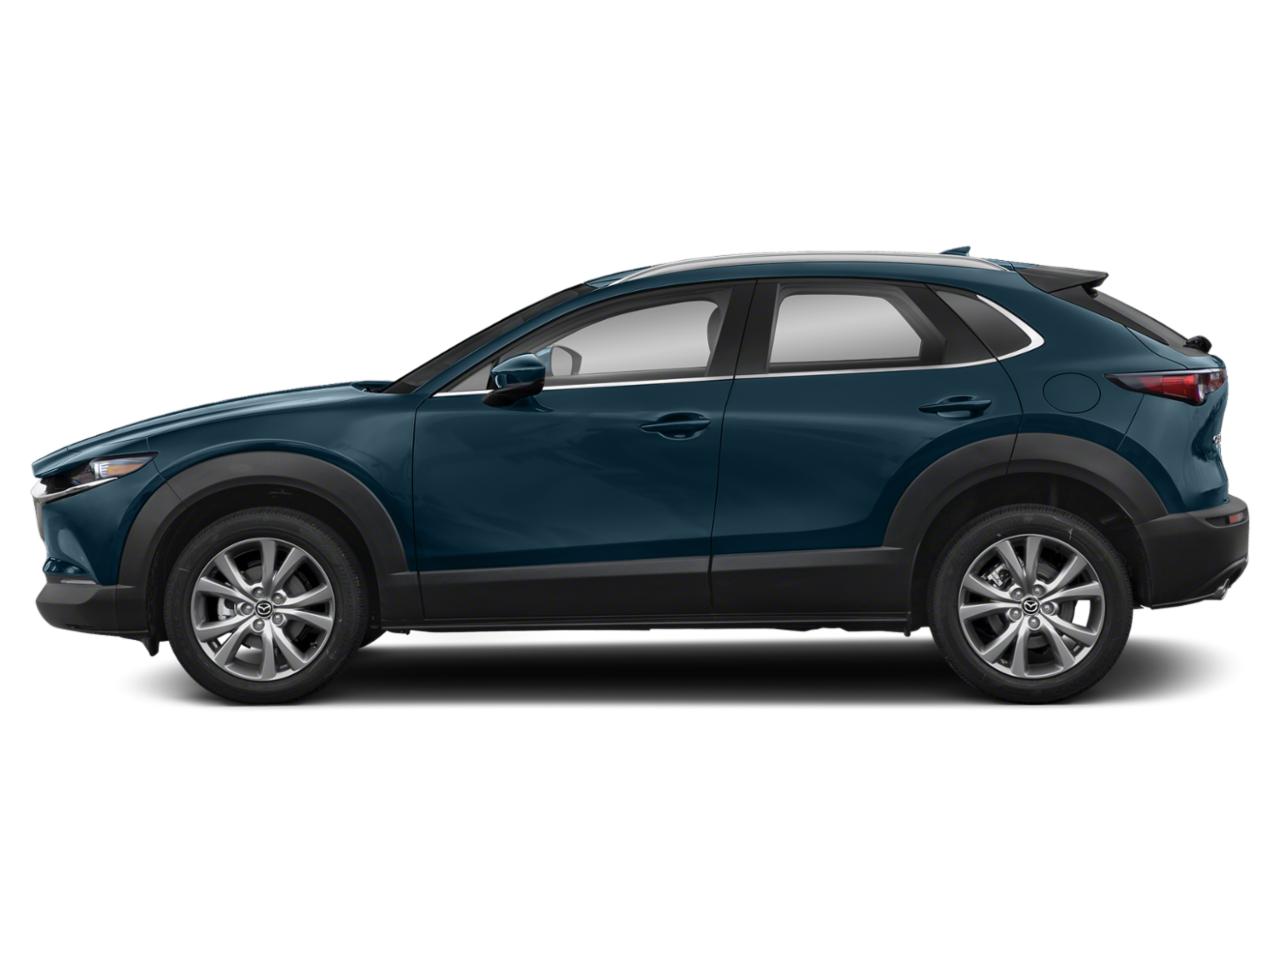 New 2021 Deep Crystal Blue Mica Mazda CX-30 Suv for Sale in Temple, TX ...